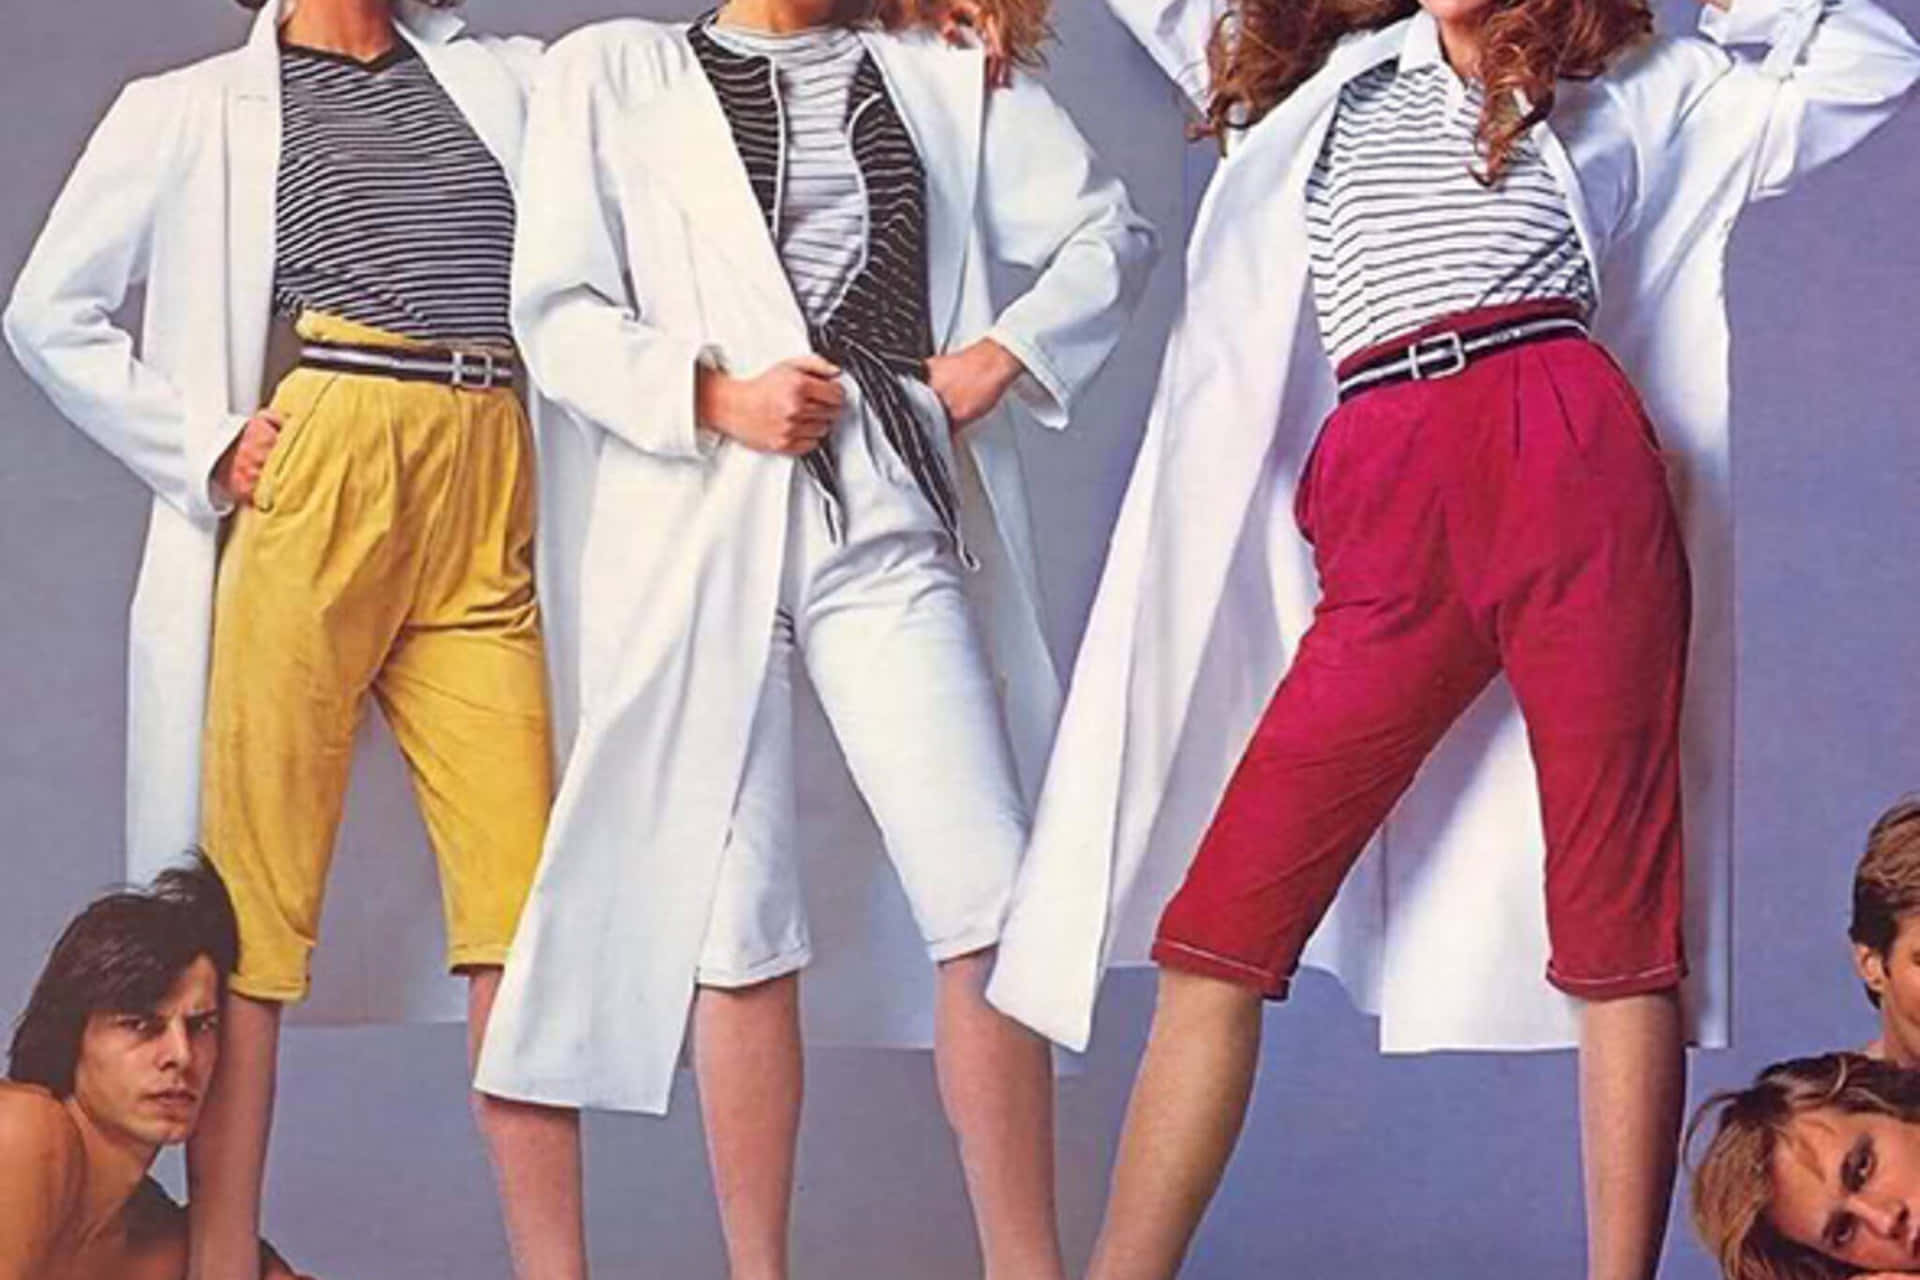 Three Women In White Coats And Shorts Posing For A Fashion Magazine